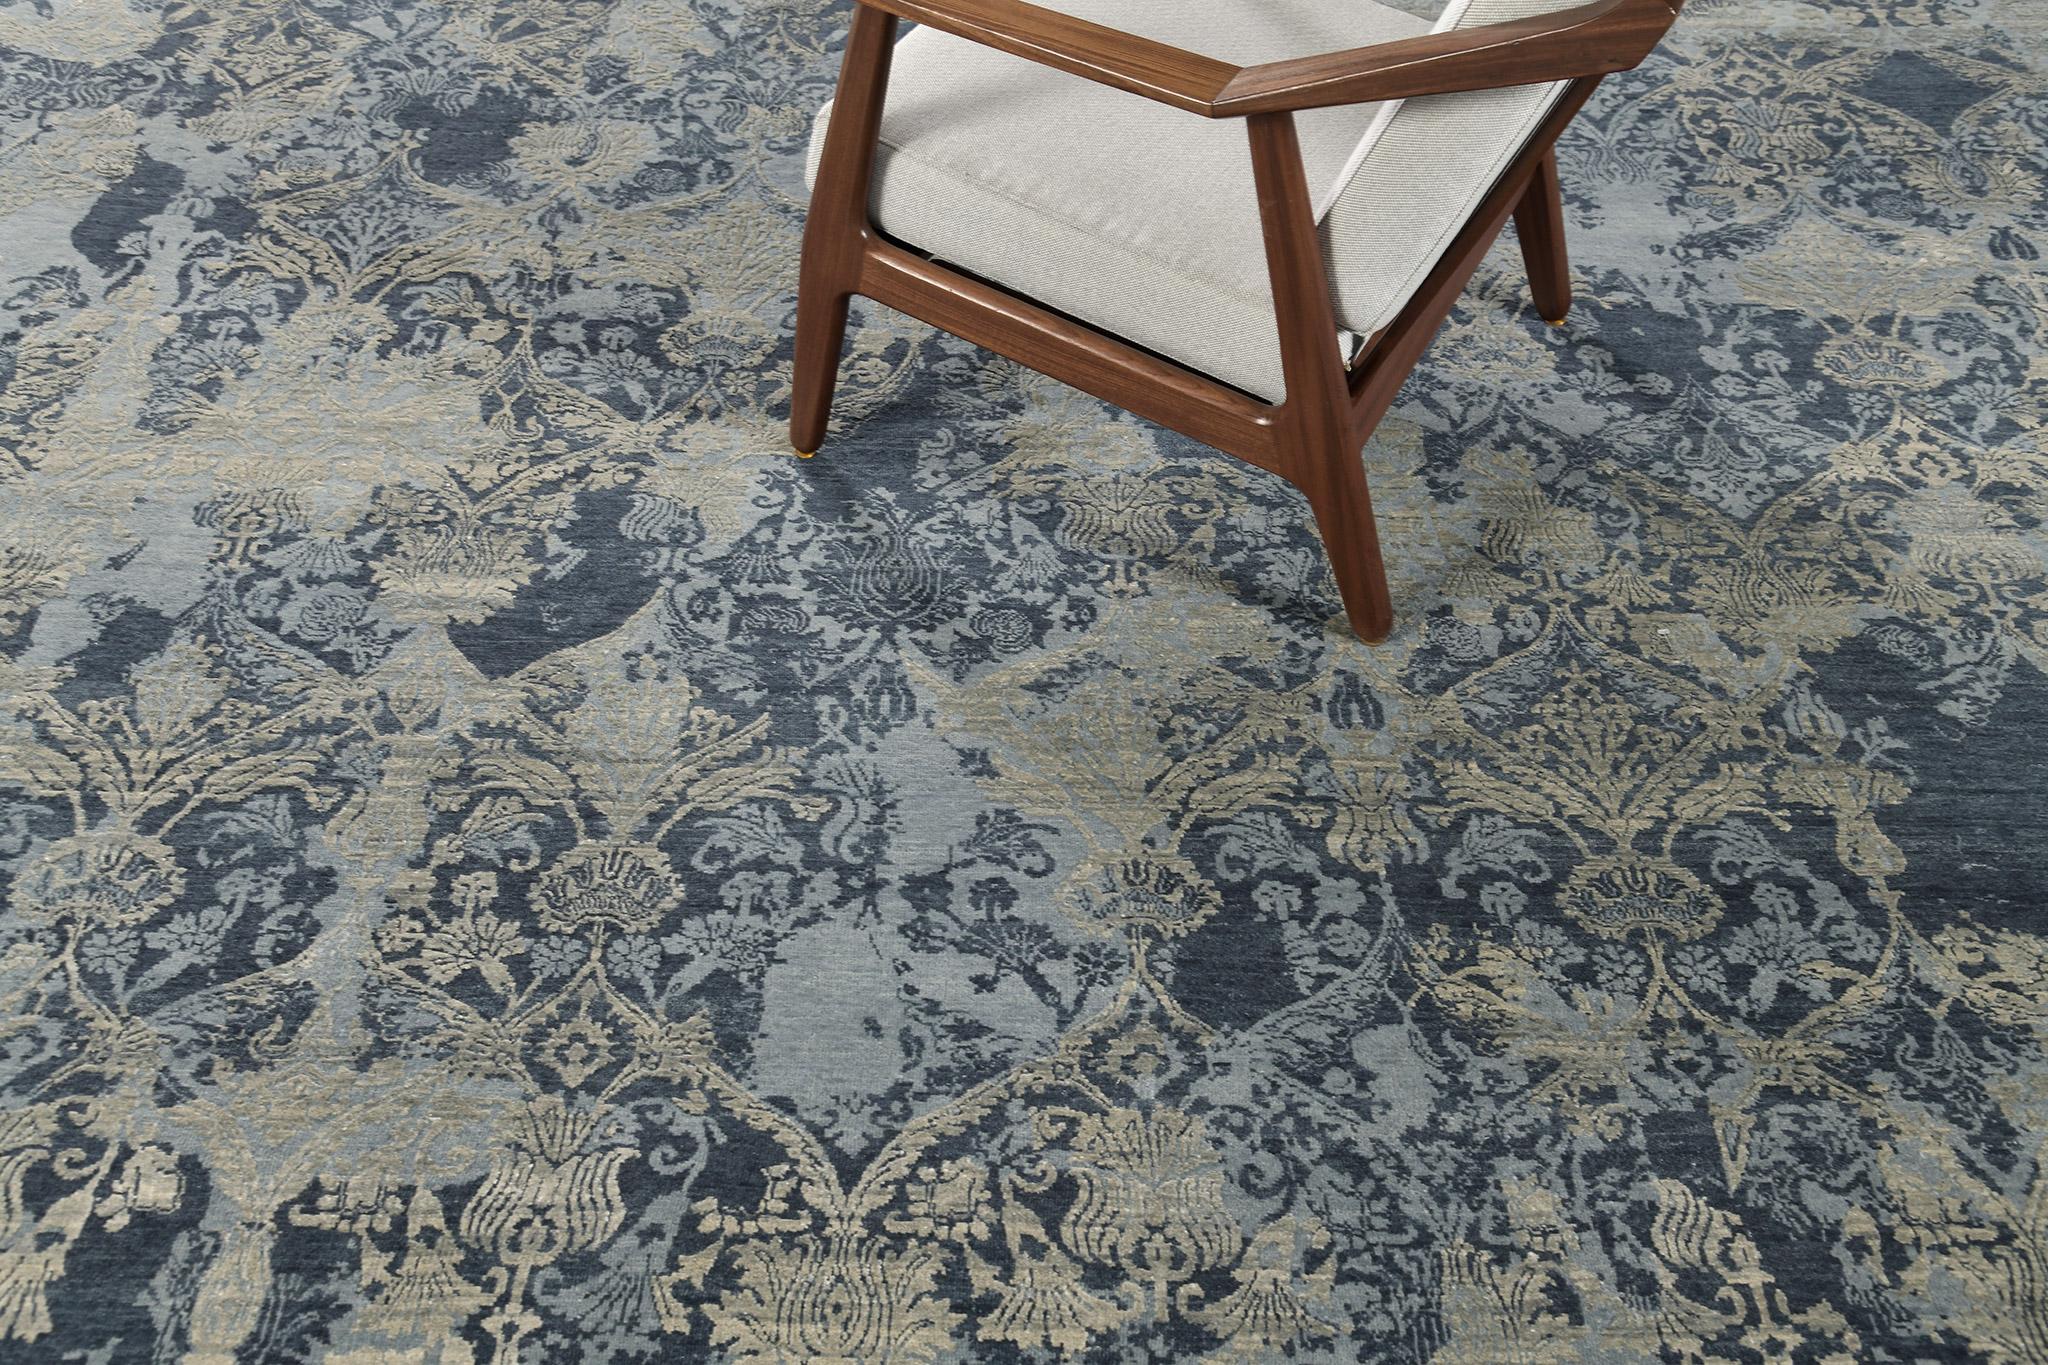 When cool tones and neutral tones meet, the art will be incredible. This Ersilia, transitional design rug, proves it all. Together with the foliage and artistry, it will be a great hit and the center of attention whenever the guests visit your